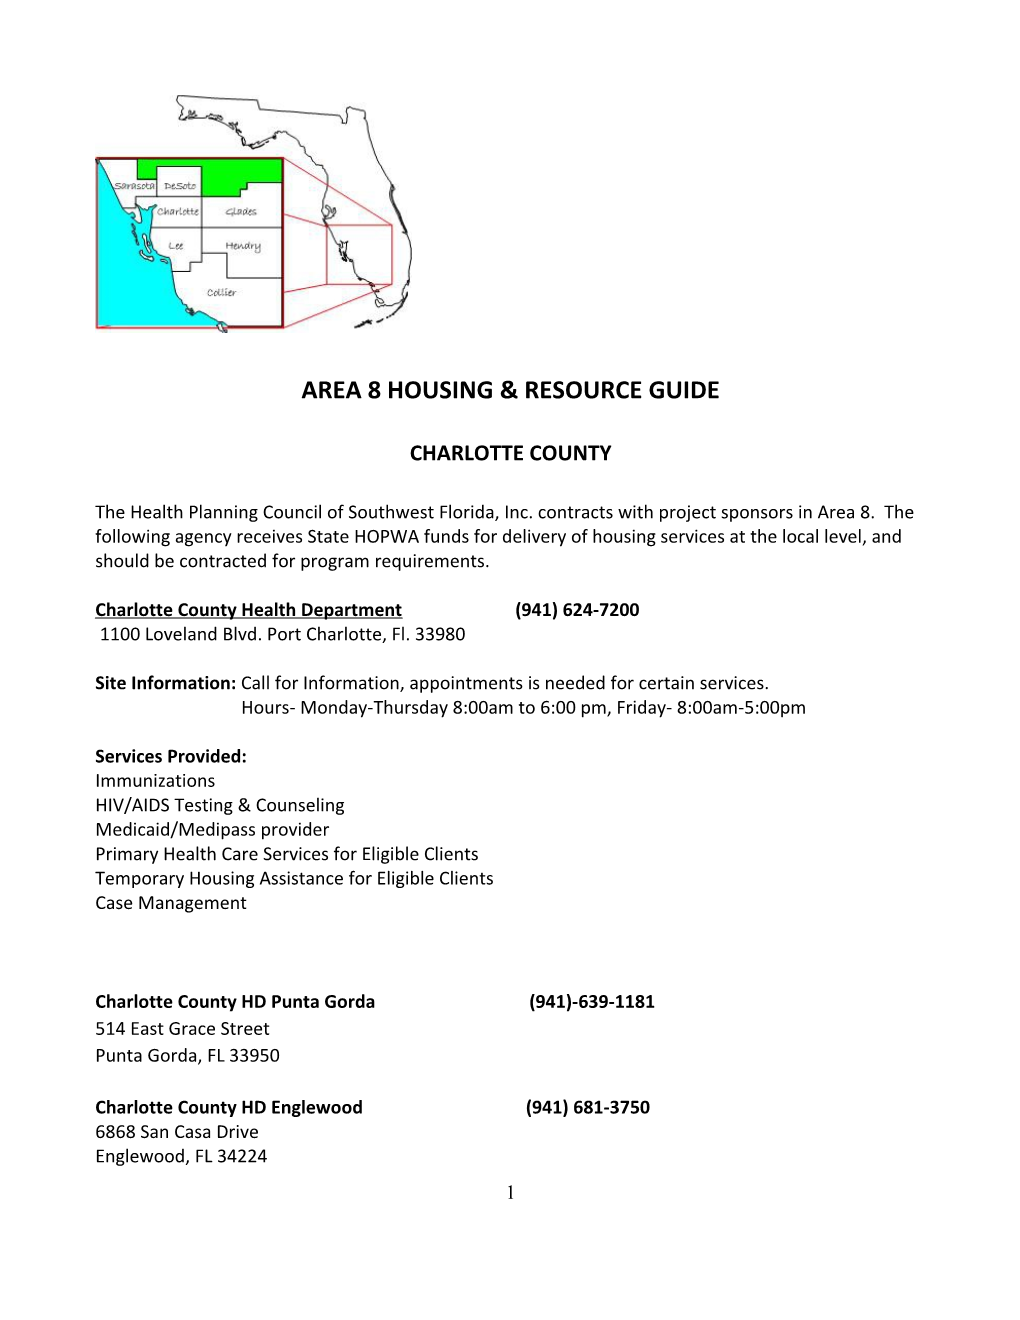 Area 8 Housing & Resource Guide